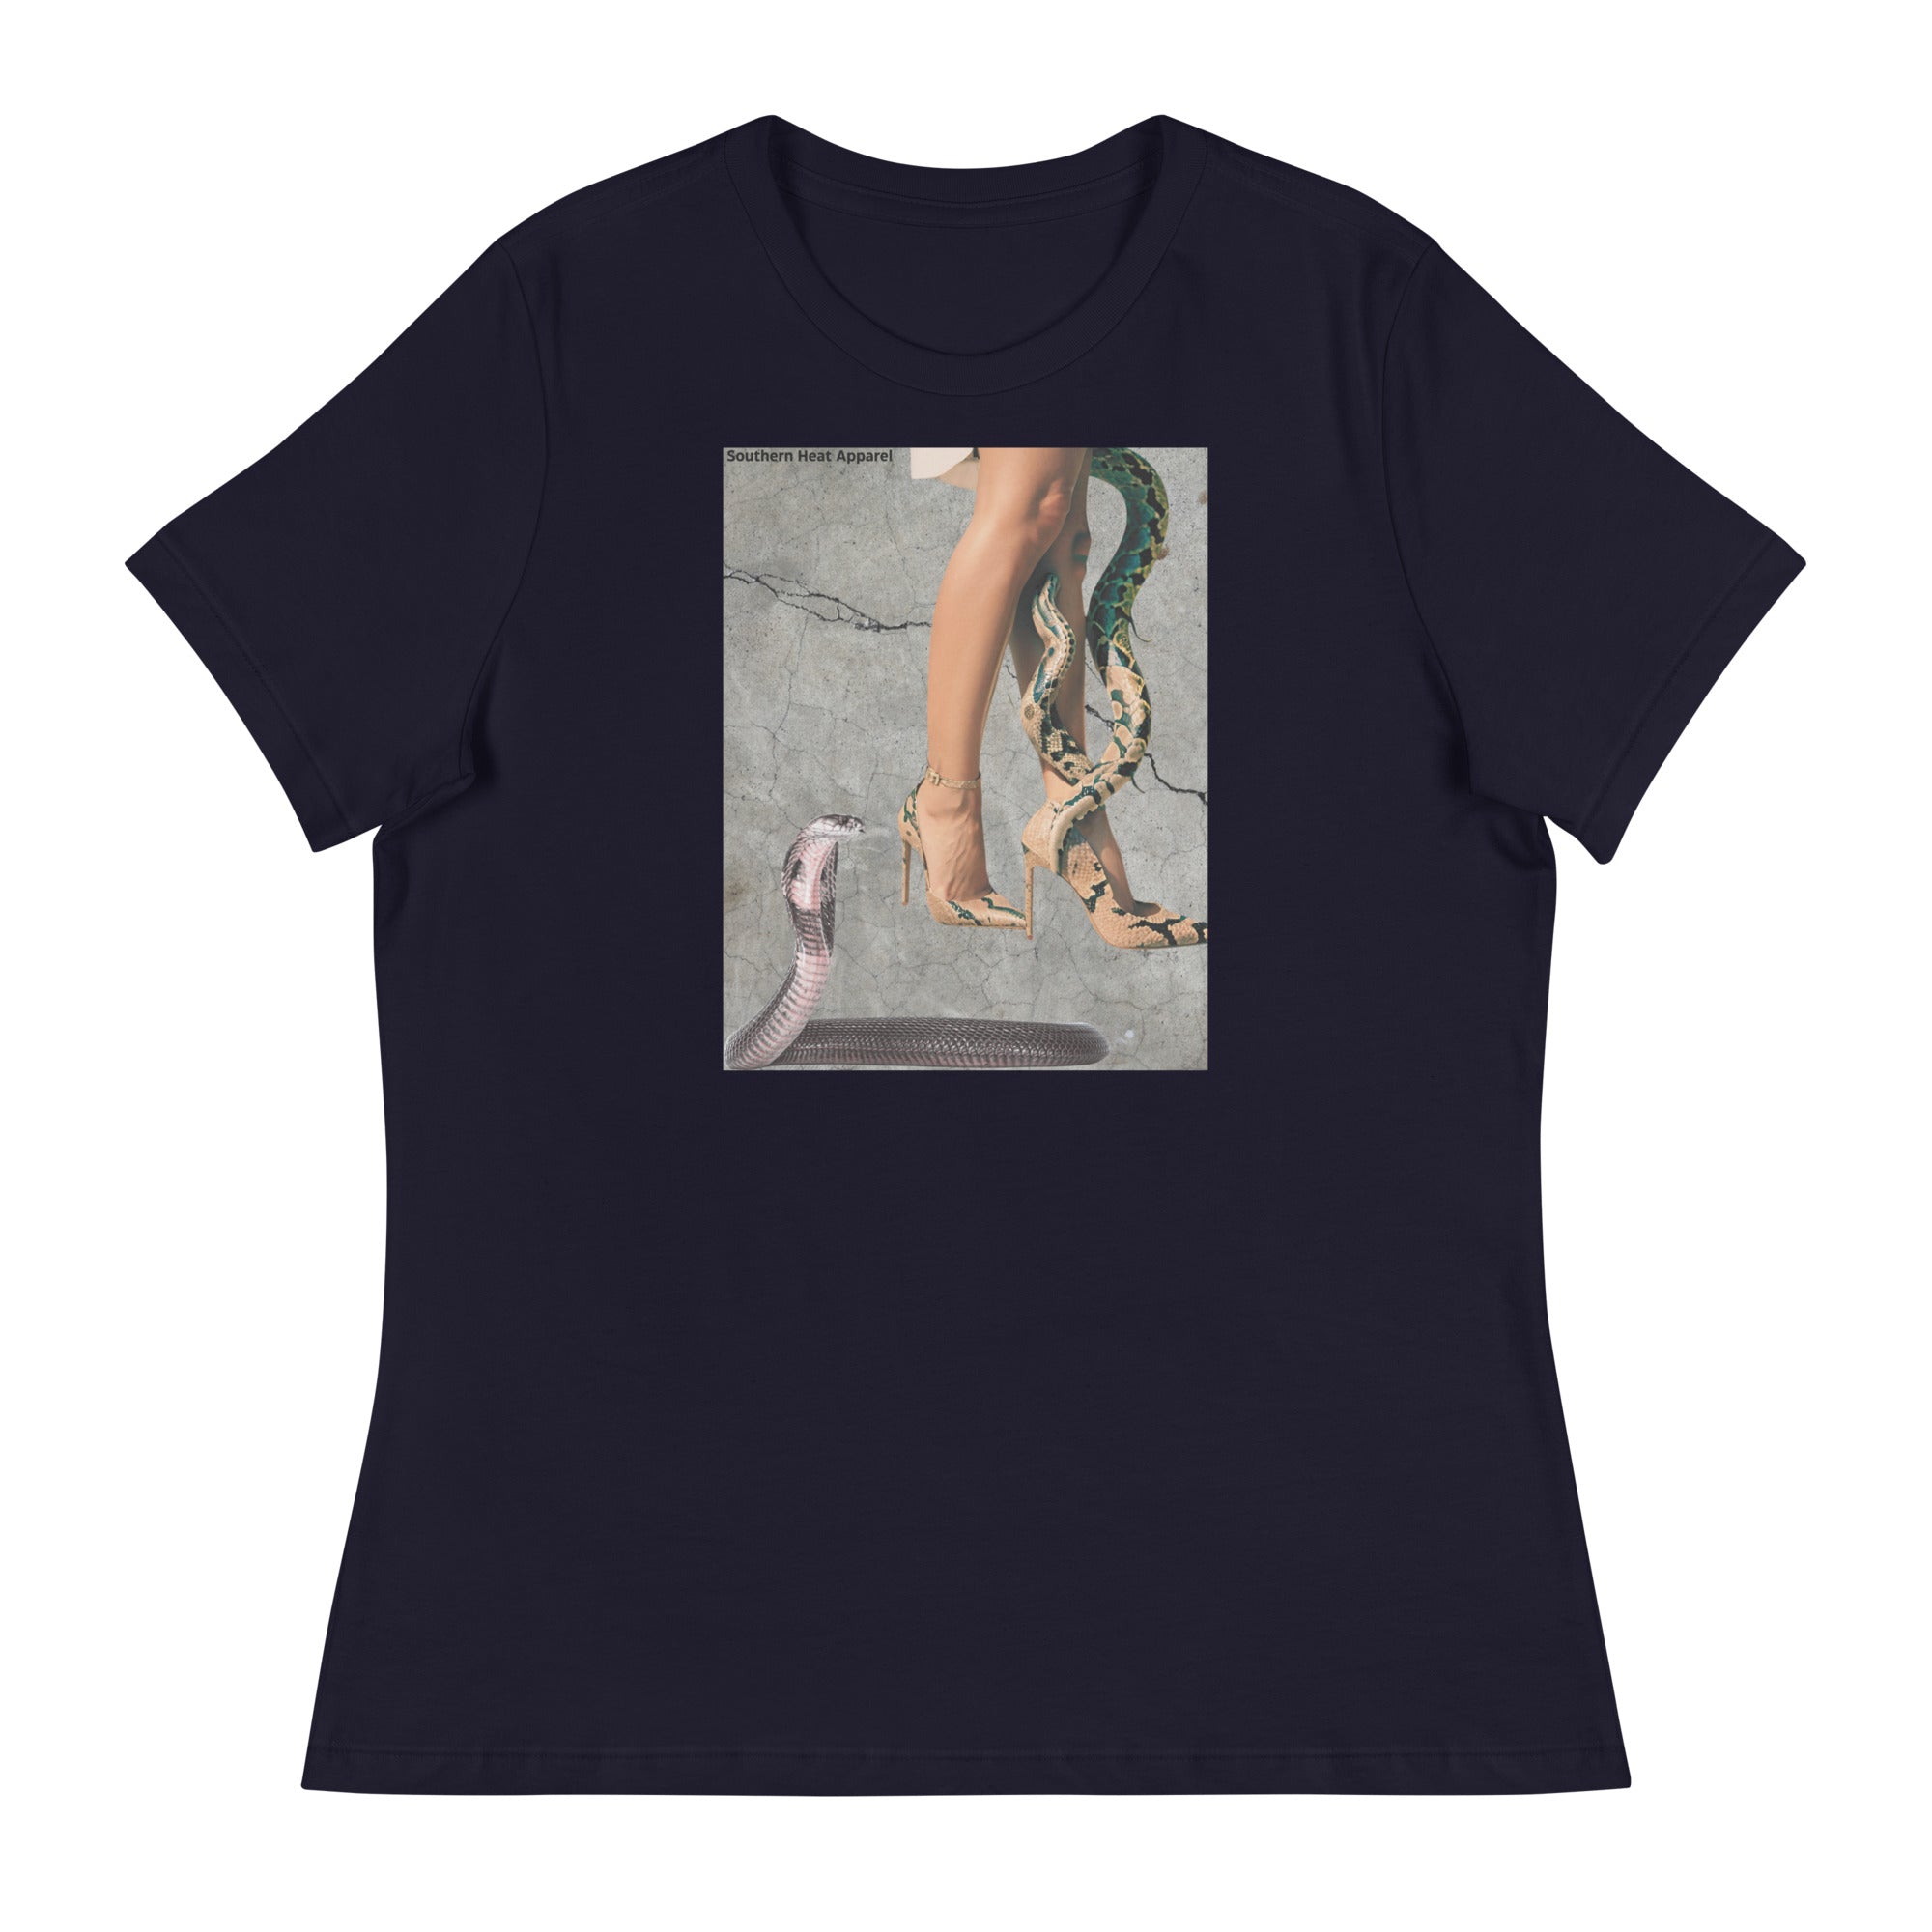 Snakes and heels-Women's Relaxed T-Shirt